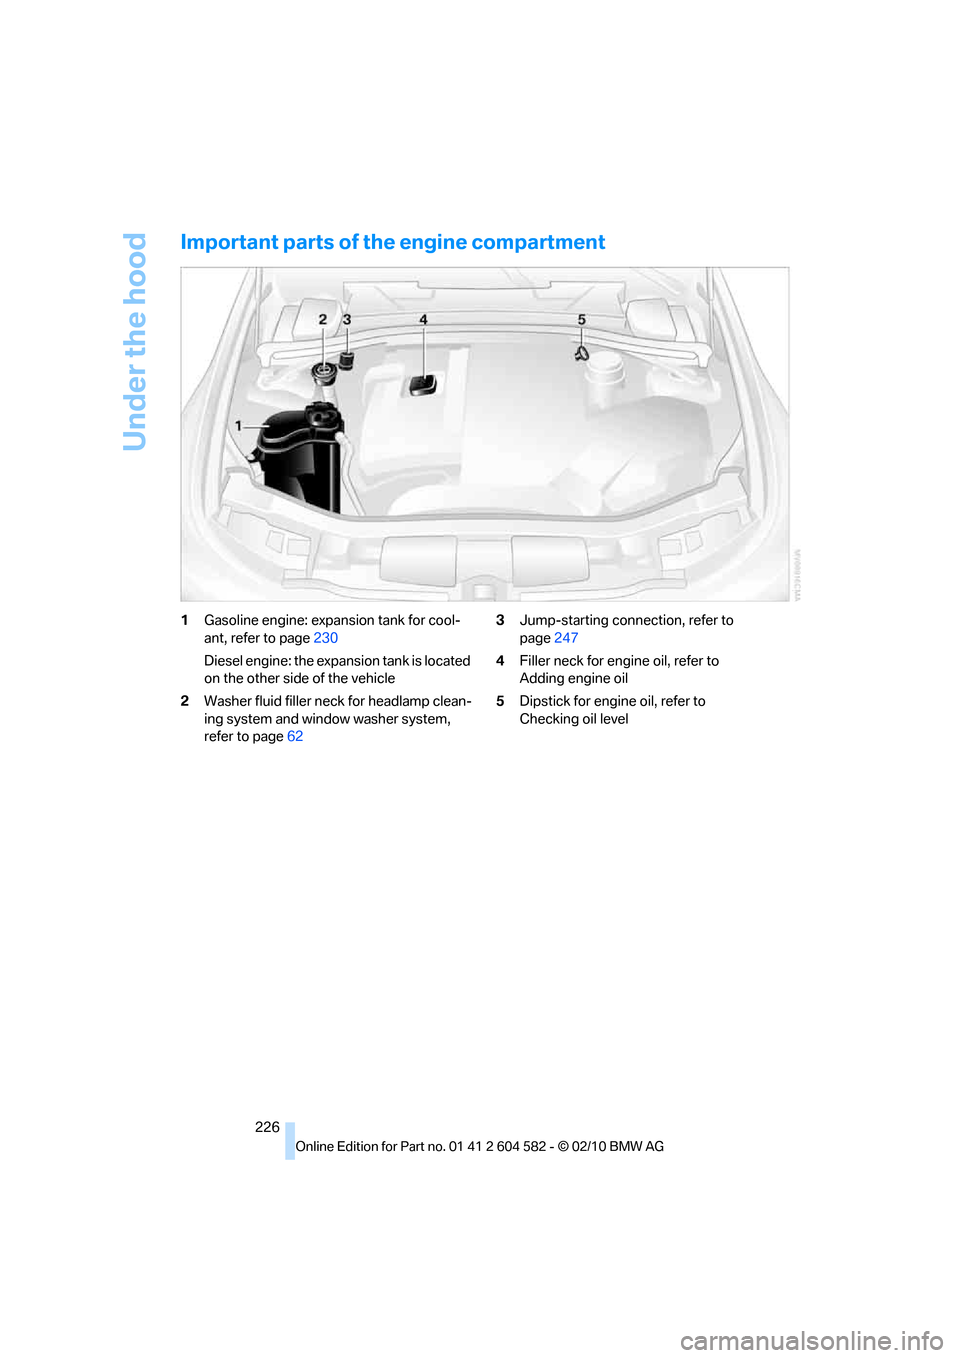 BMW 335D 2011 E90 Owners Manual Under the hood
226
Important parts of the engine compartment
1Gasoline engine: expansion tank for cool-
ant, refer to page230
Diesel engine: the expansion tank is located 
on the other side of the veh